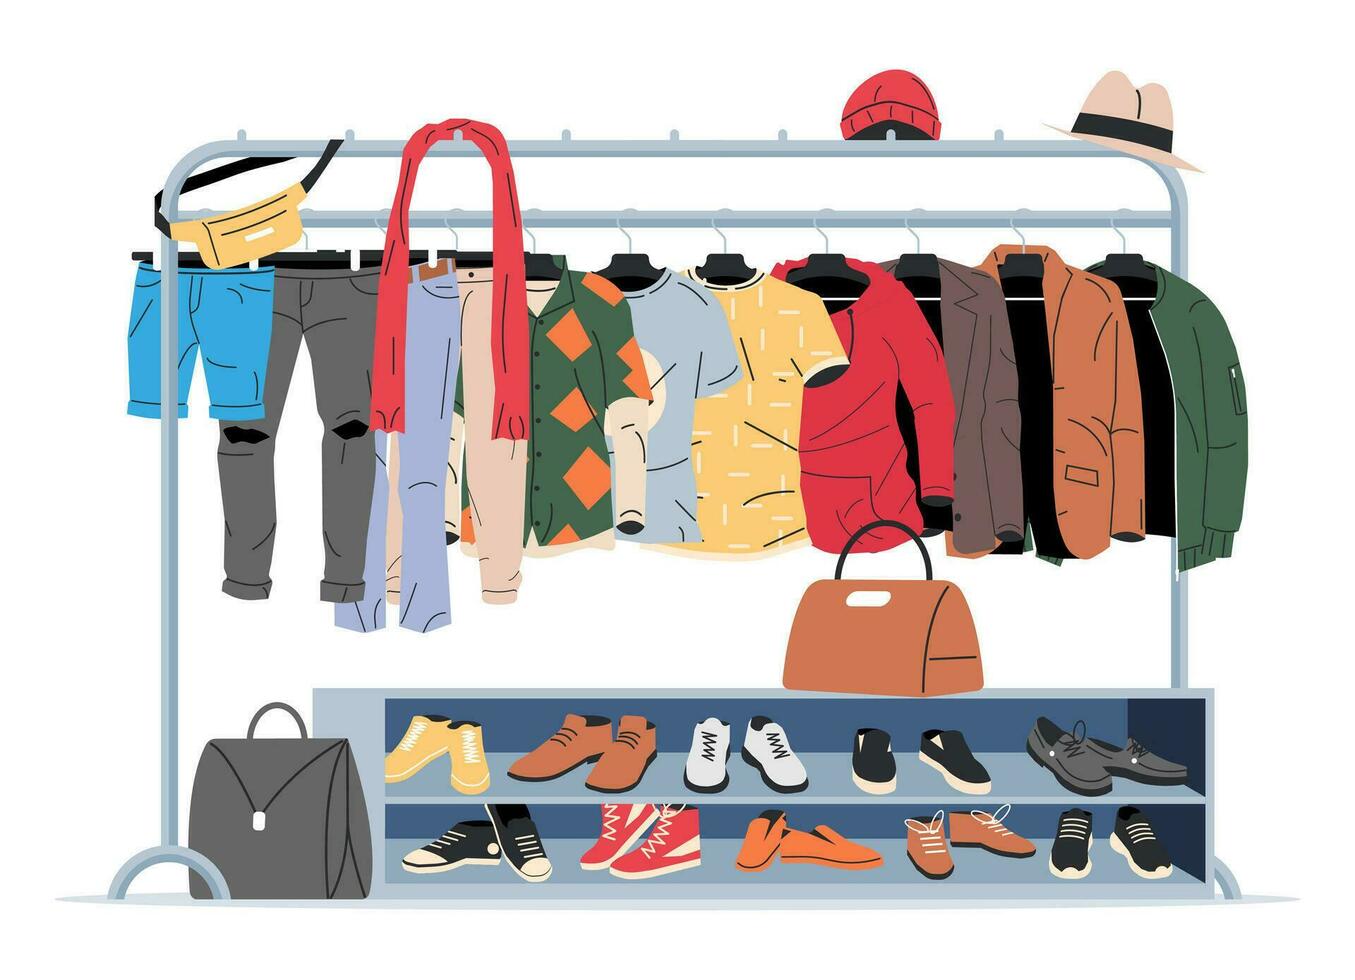 Clothes and Accessories Hanging on Hanger. Home or Shop Wardrobe. Clothes and Accessories. Various Hanging Clothing. Jacket, Shirt, Jeans, Pants, Bags, Shoes and Hats. Cartoon Flat Vector Illustration